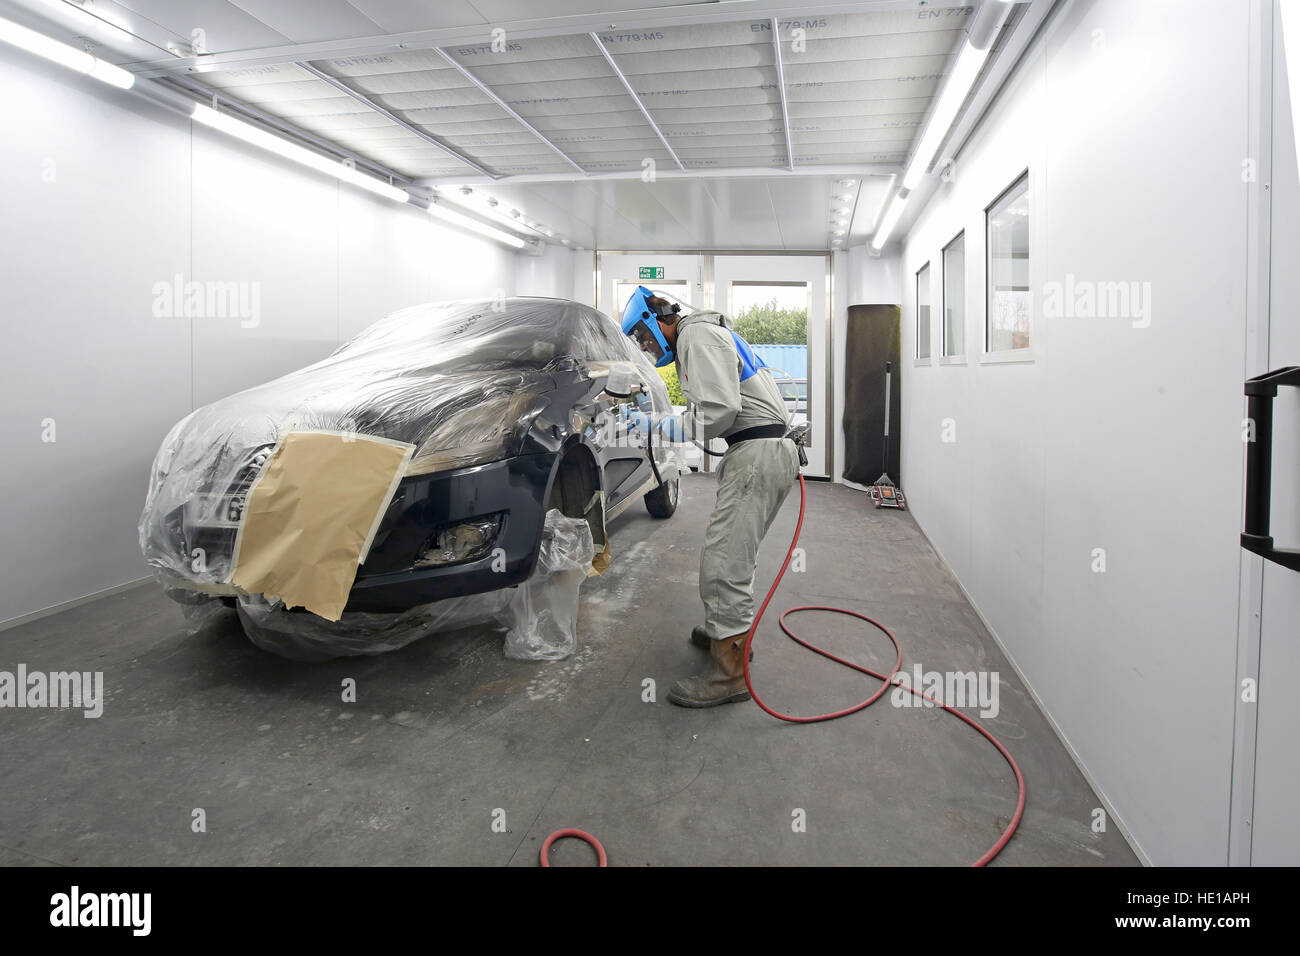 A mechanic in a modern body repair shop uses a compressed air spray gun to repaint side panels on a repaired car Stock Photo